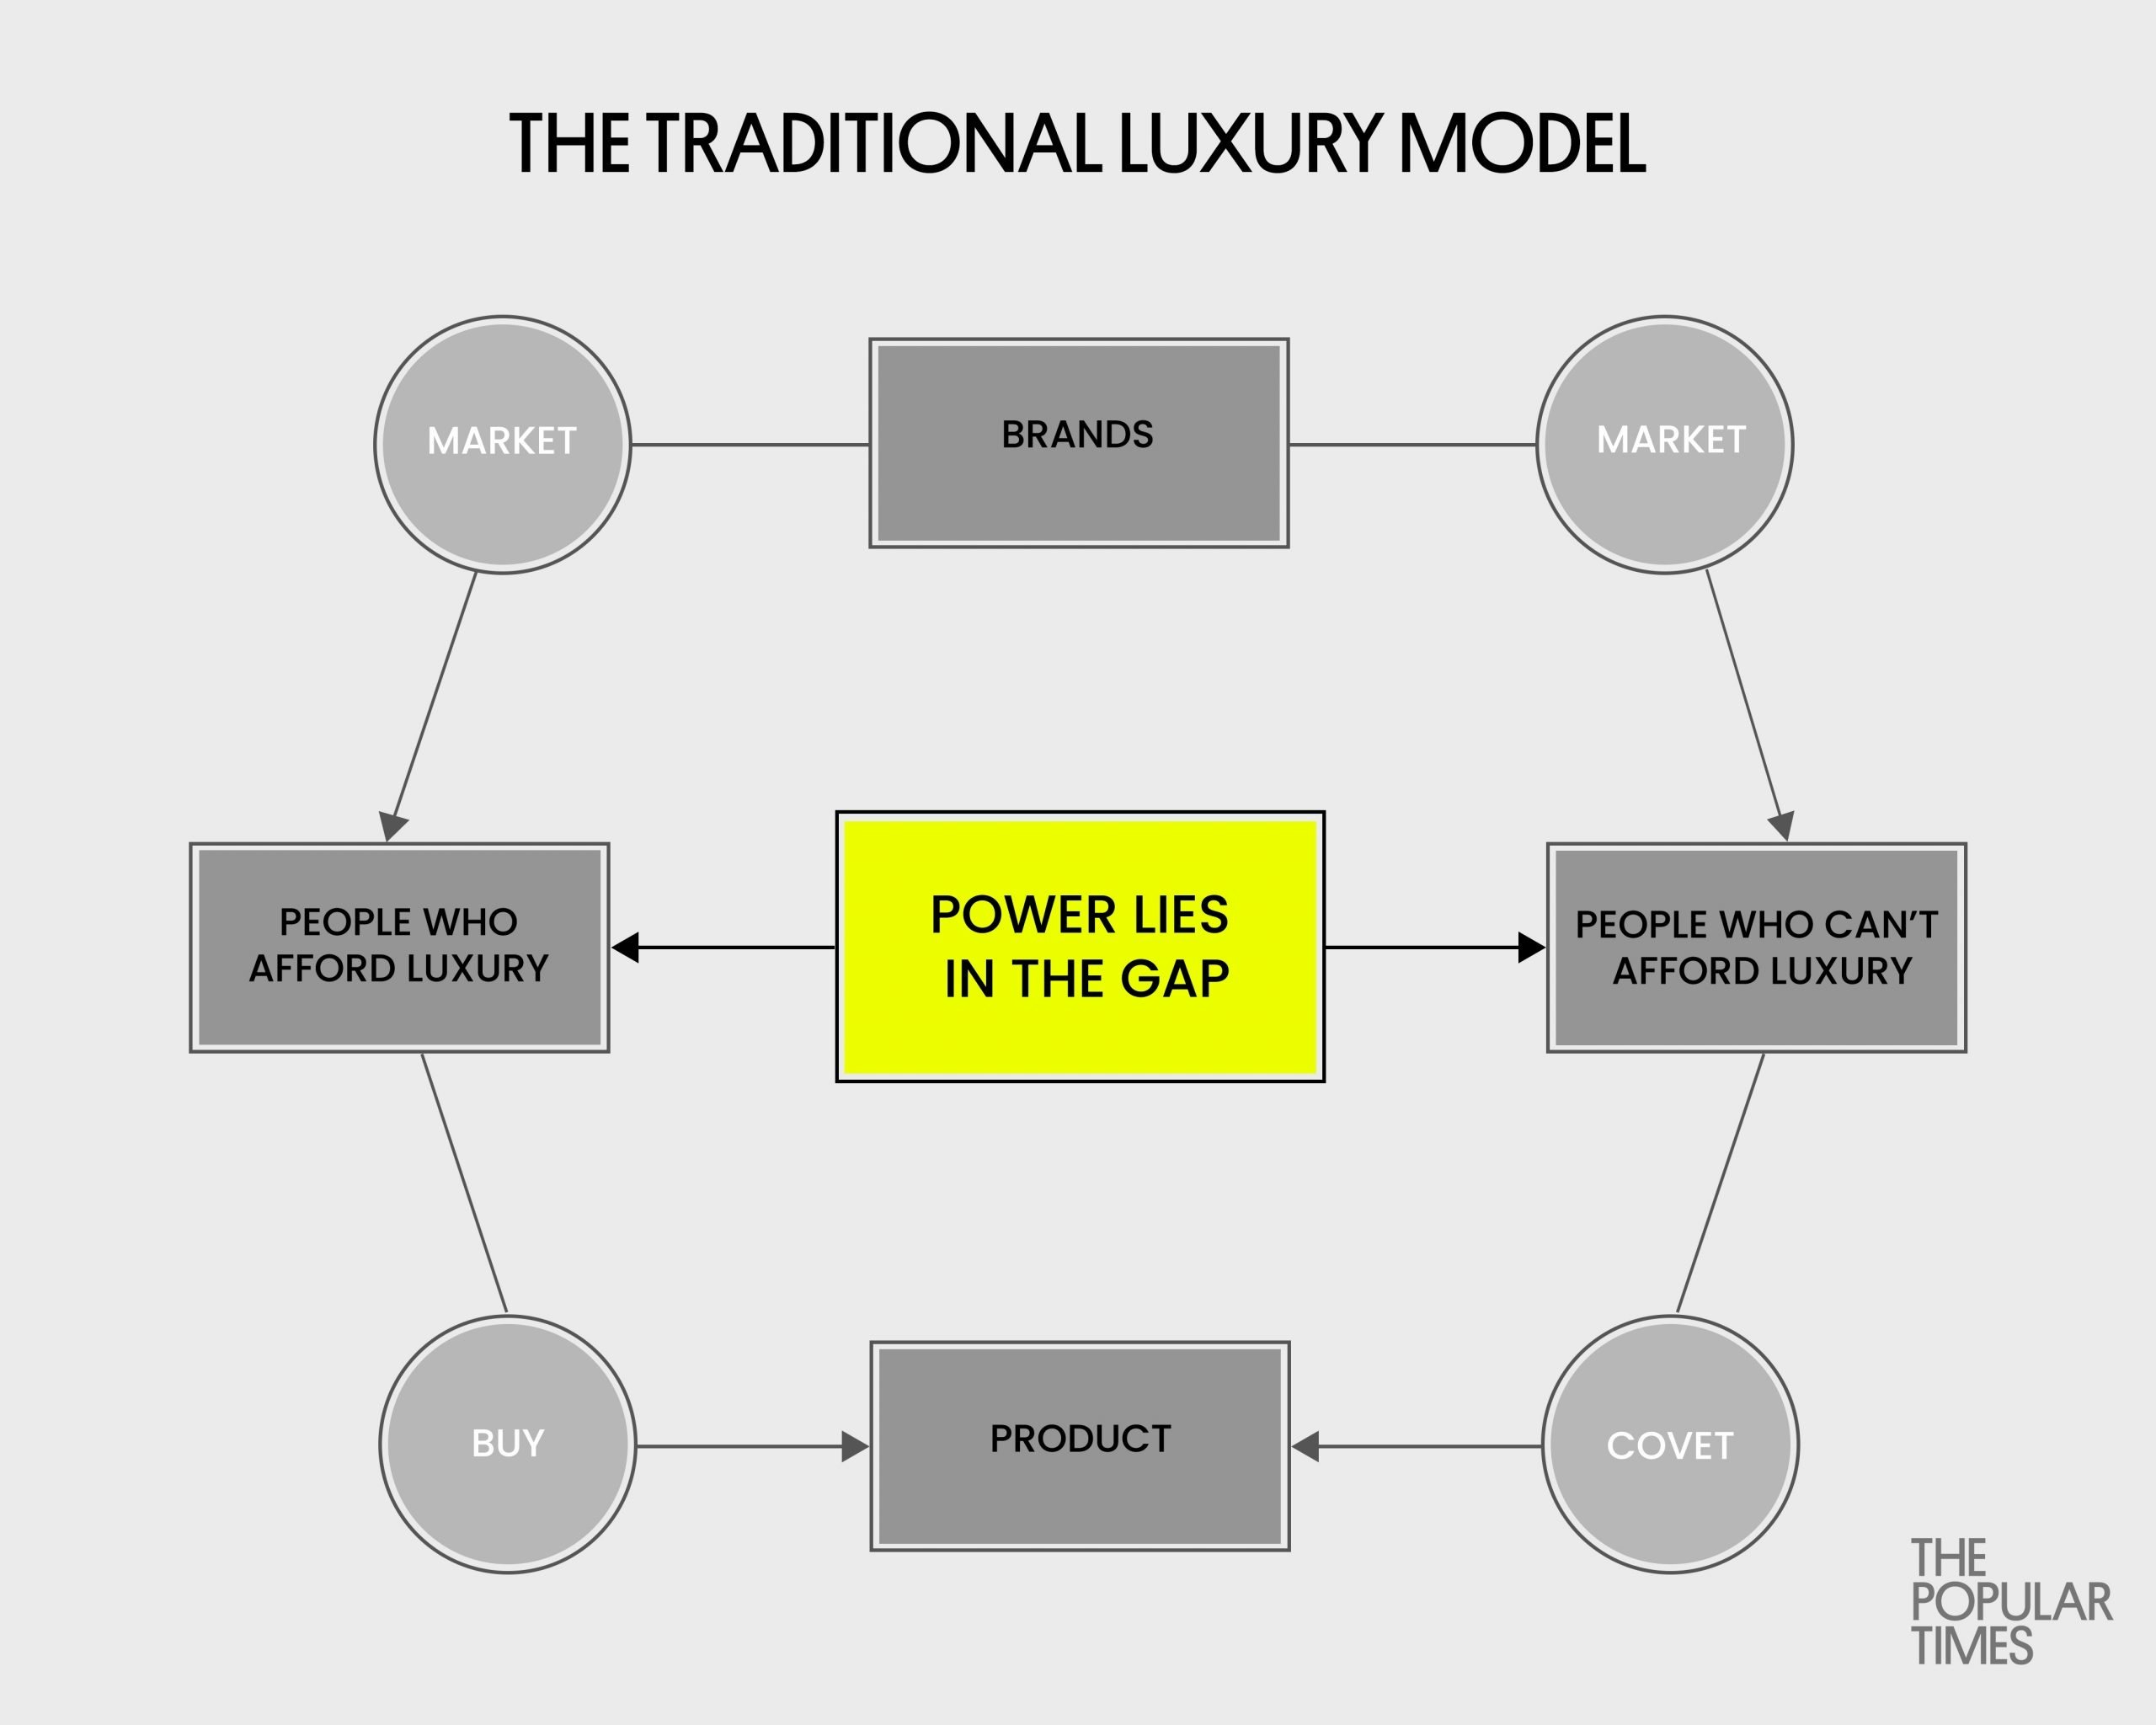 Traditional Luxury (-2020): Luxury controlled by major conglomerates for the traditionally white elite. Taste-making is largely dictated by brands. It draws power from the division between those who can afford luxury and those who cannot.